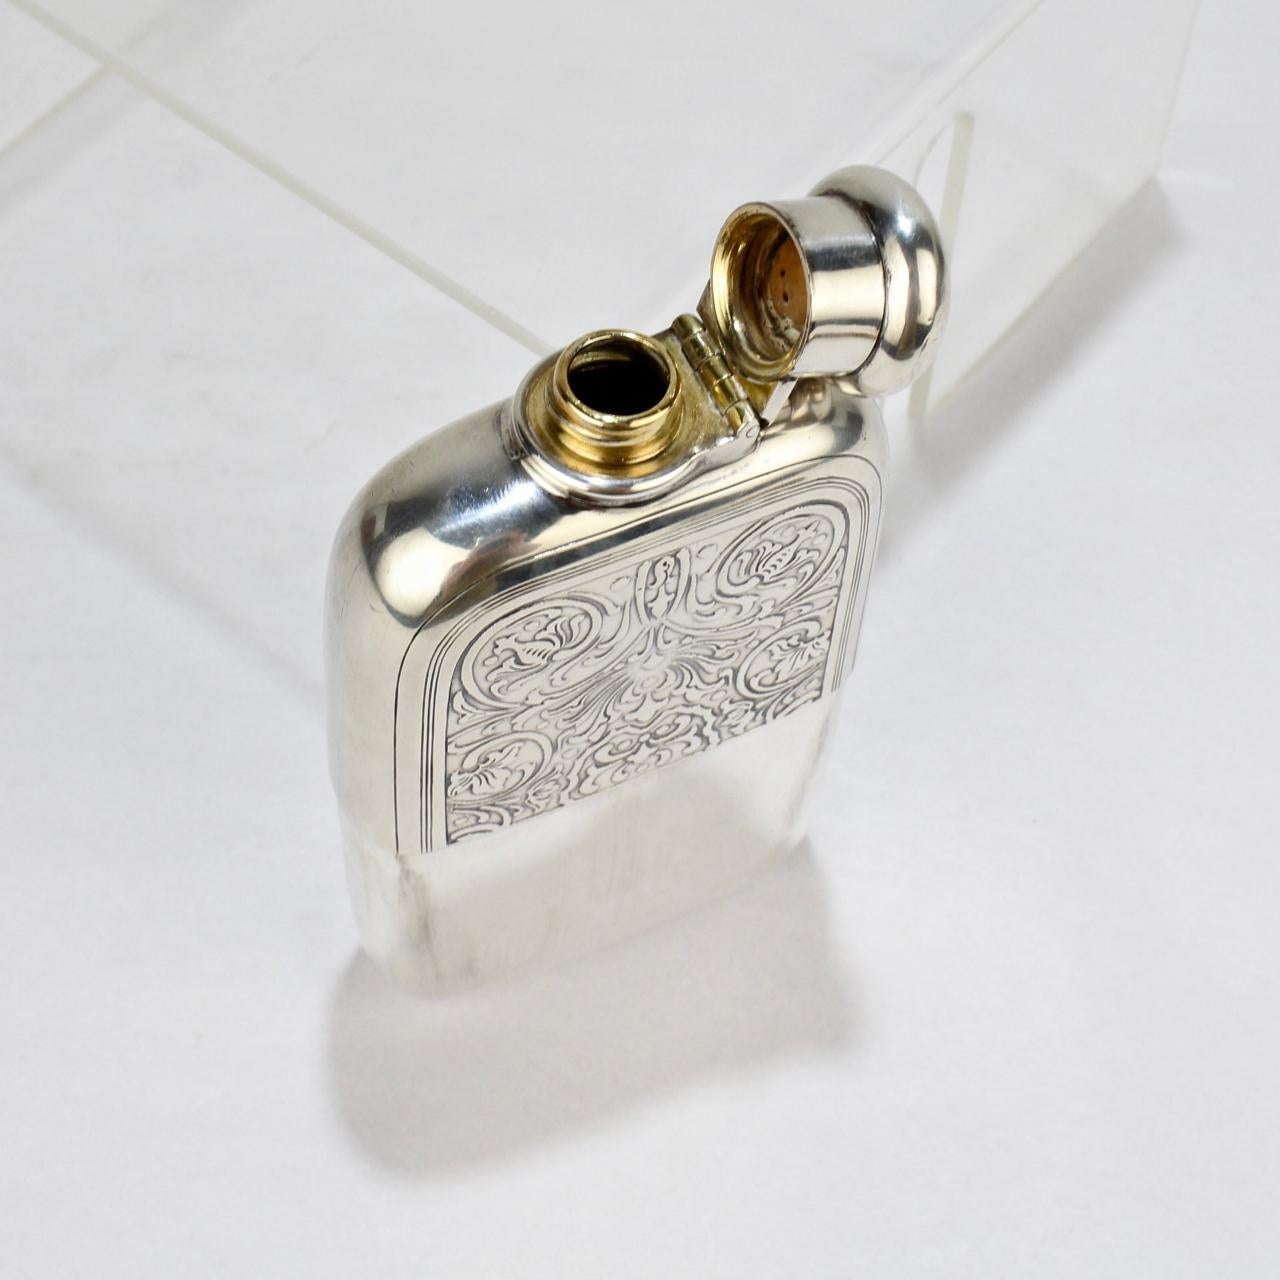 Antique Tiffany & Co. Sterling Silver Whiskey or Liquor Hip Flask 2